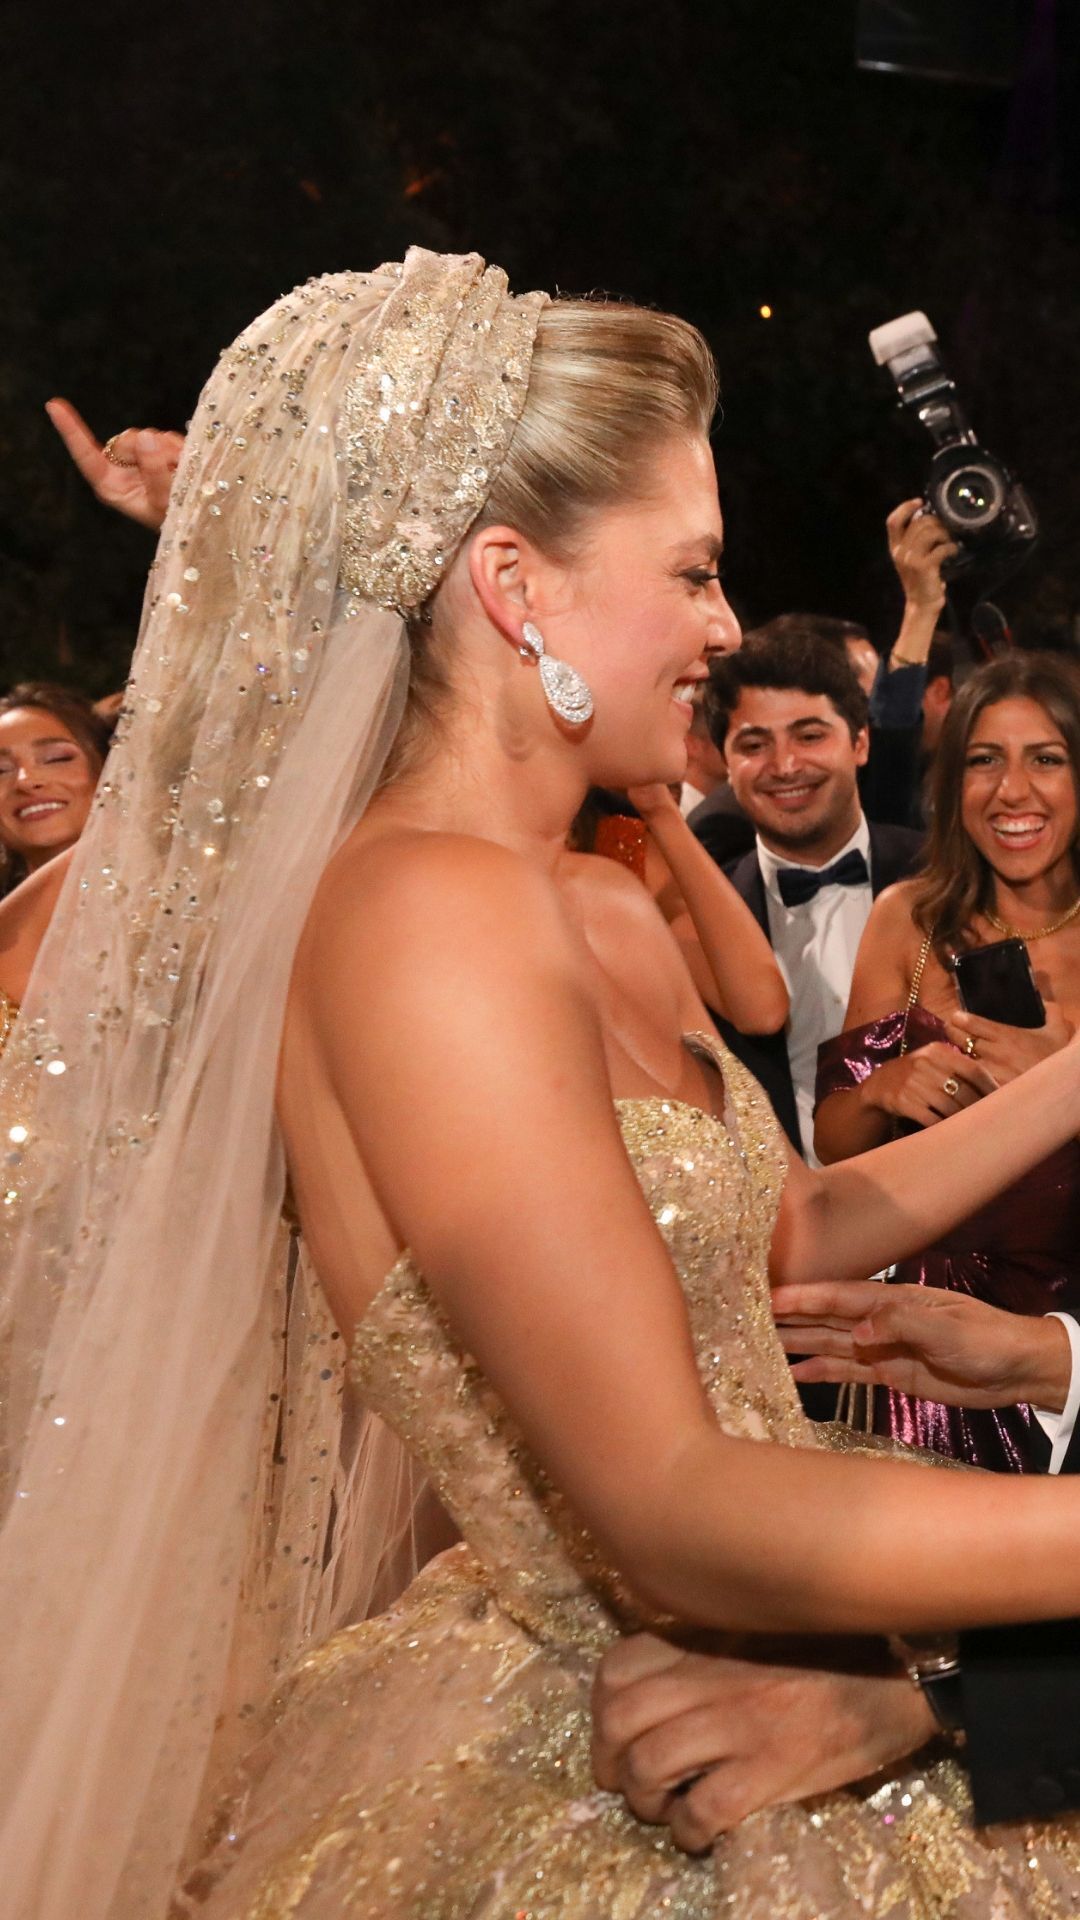 Christina Mourad's Elie Saab Wedding Gown From Every Angle